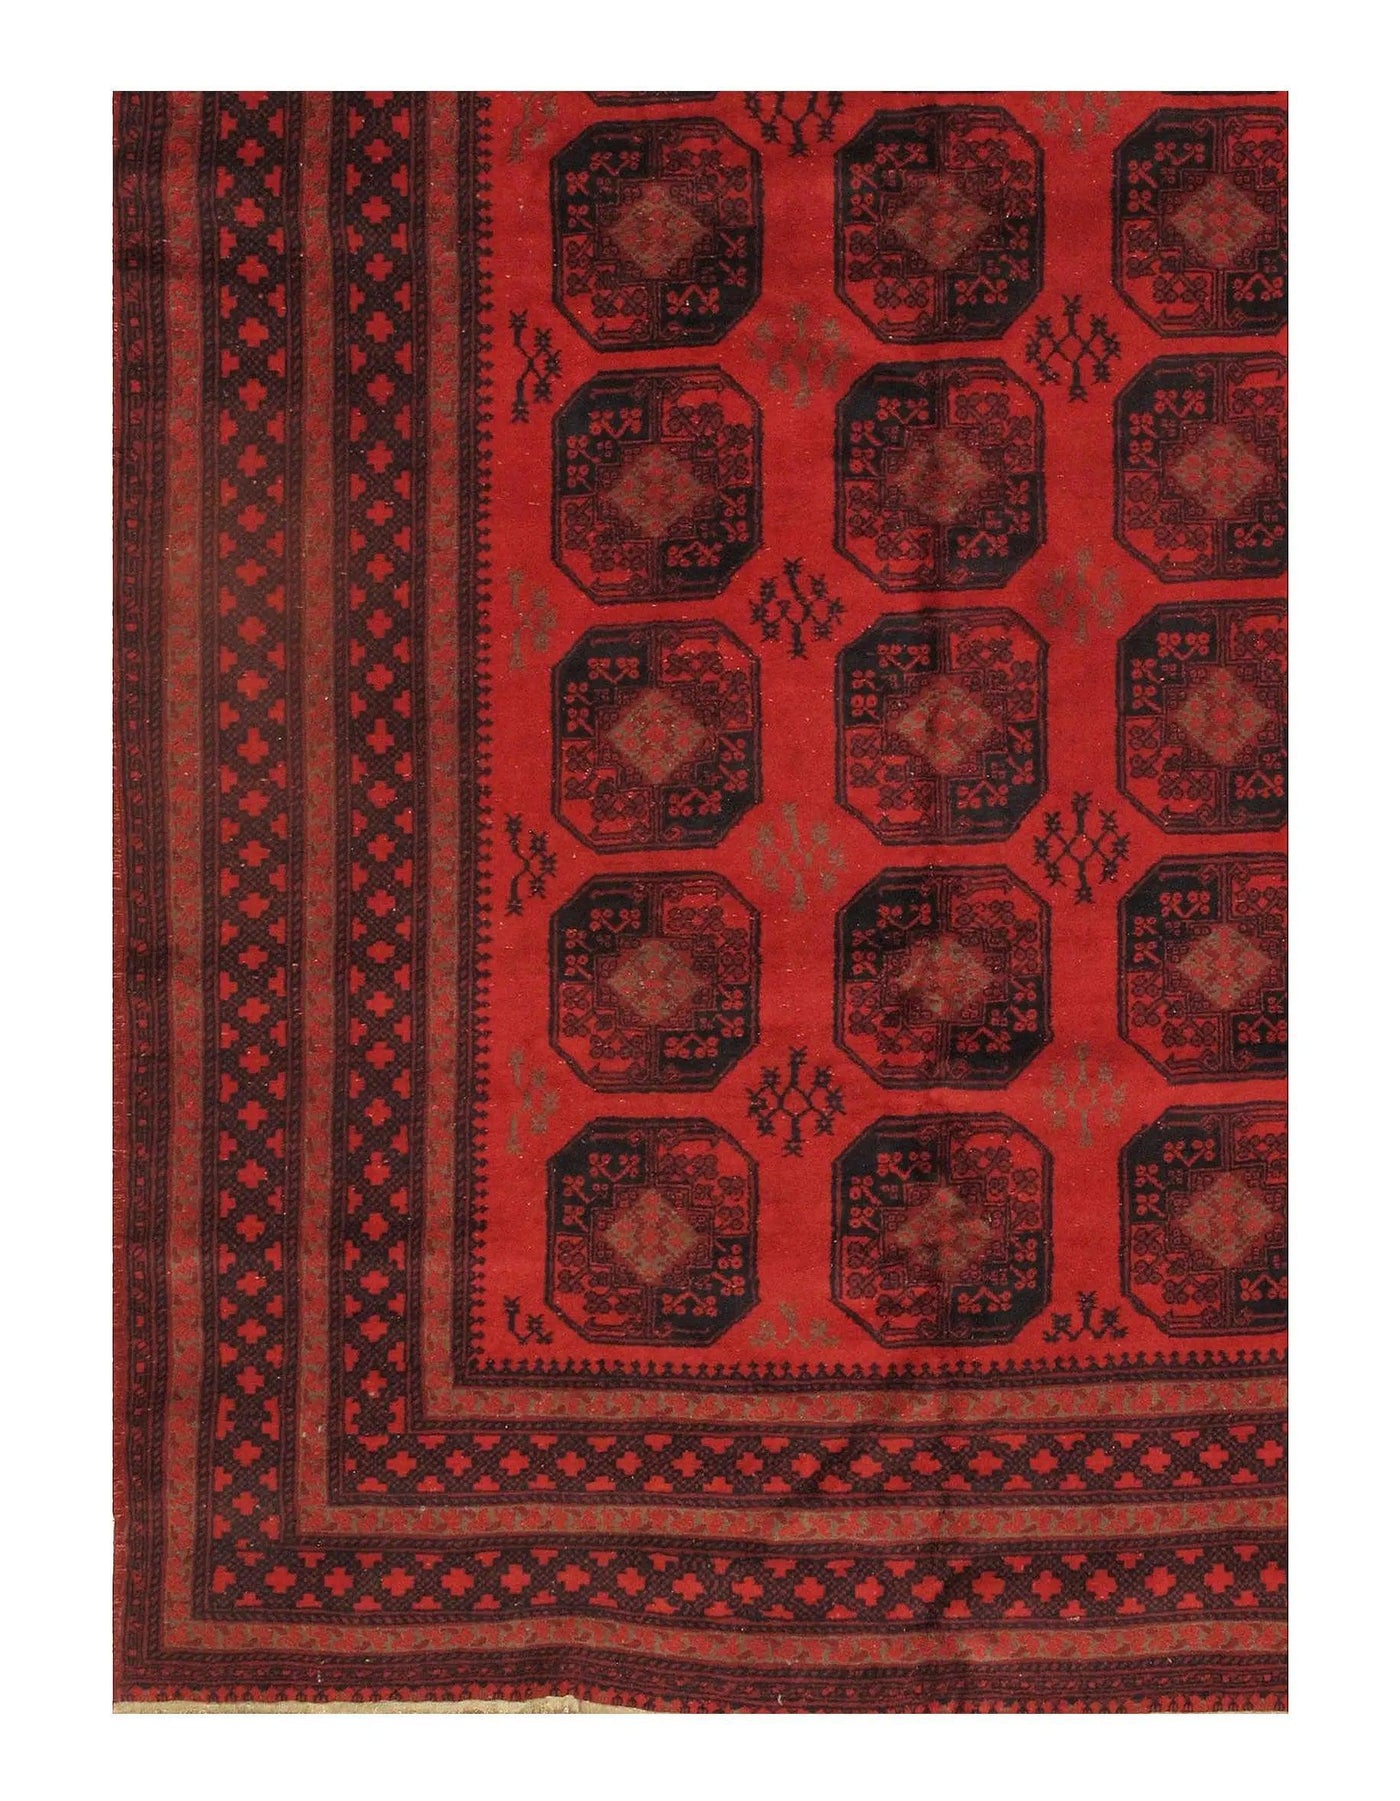 Red Antique Yamoud wool Rug - 6'6" X 9'